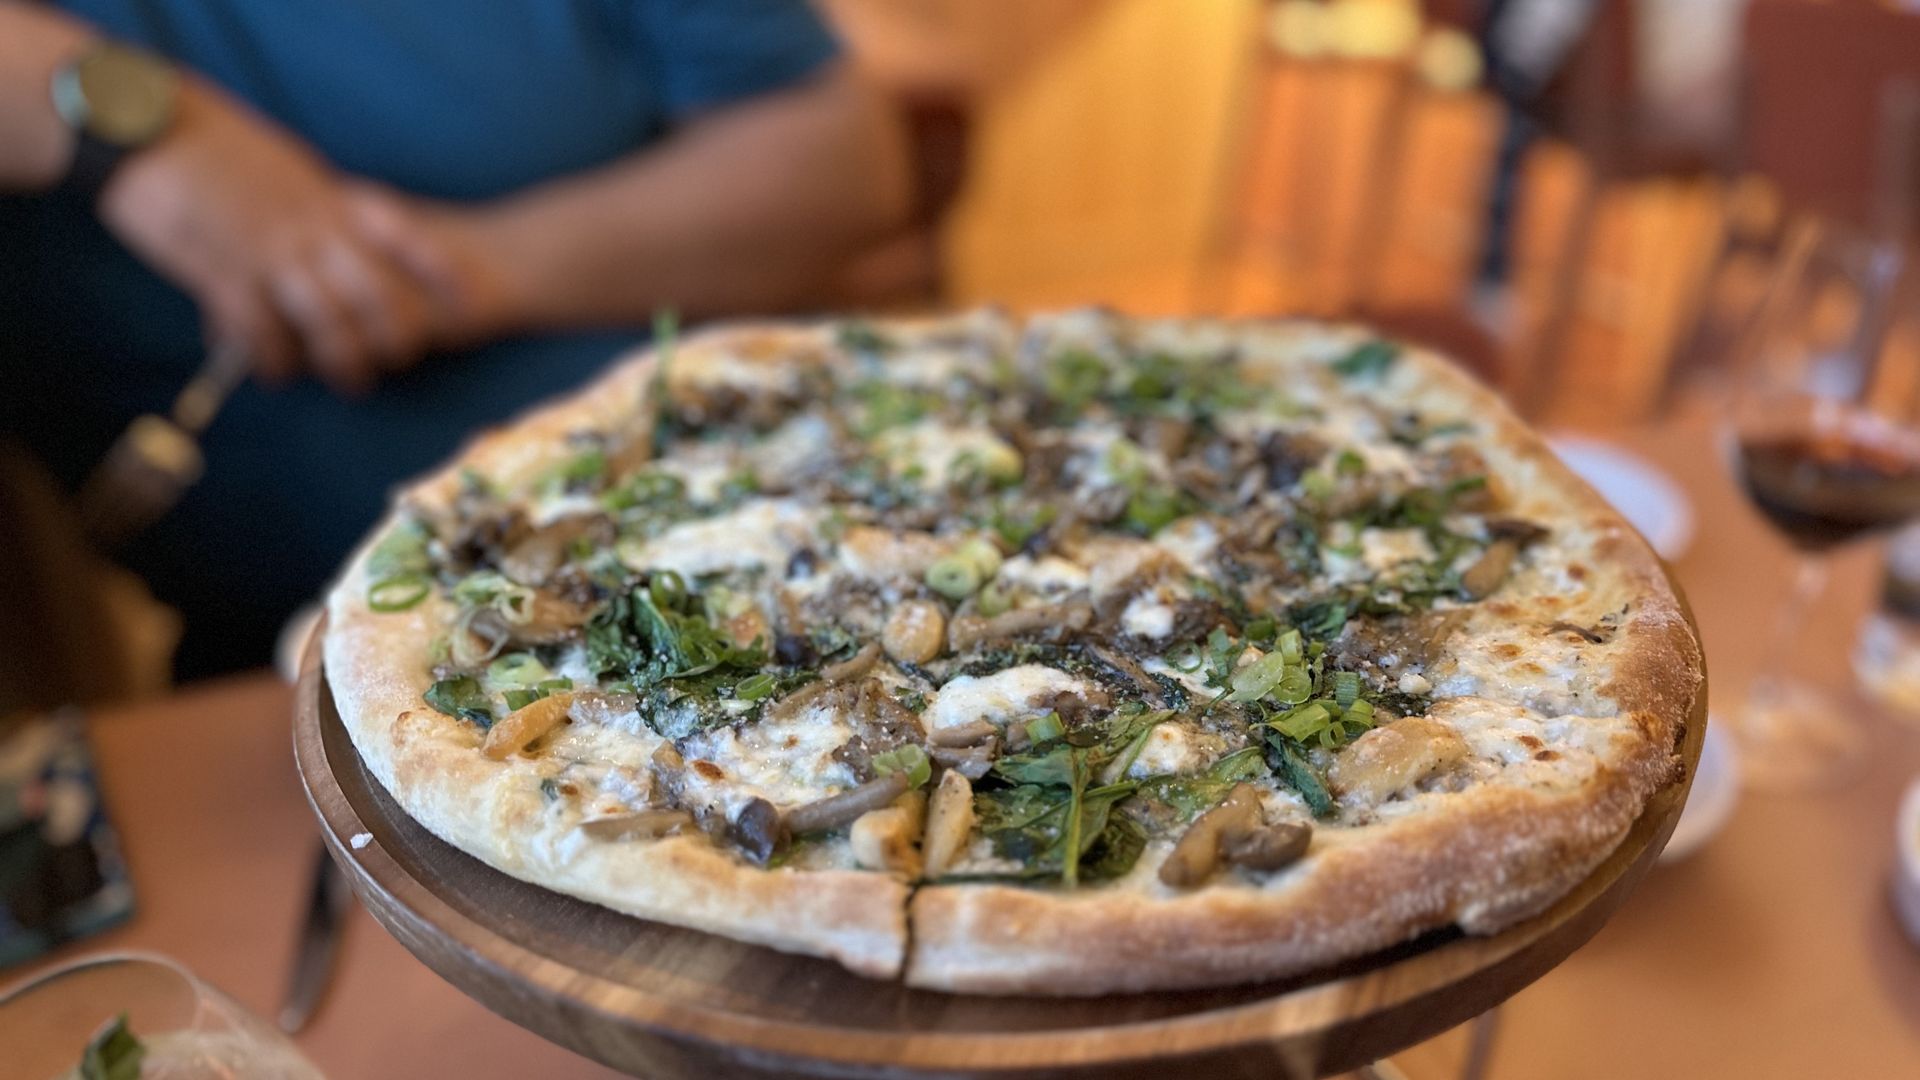 Gufo's roasted mushroom pizza with fontina and roasted garlic is served on a platter at a table.